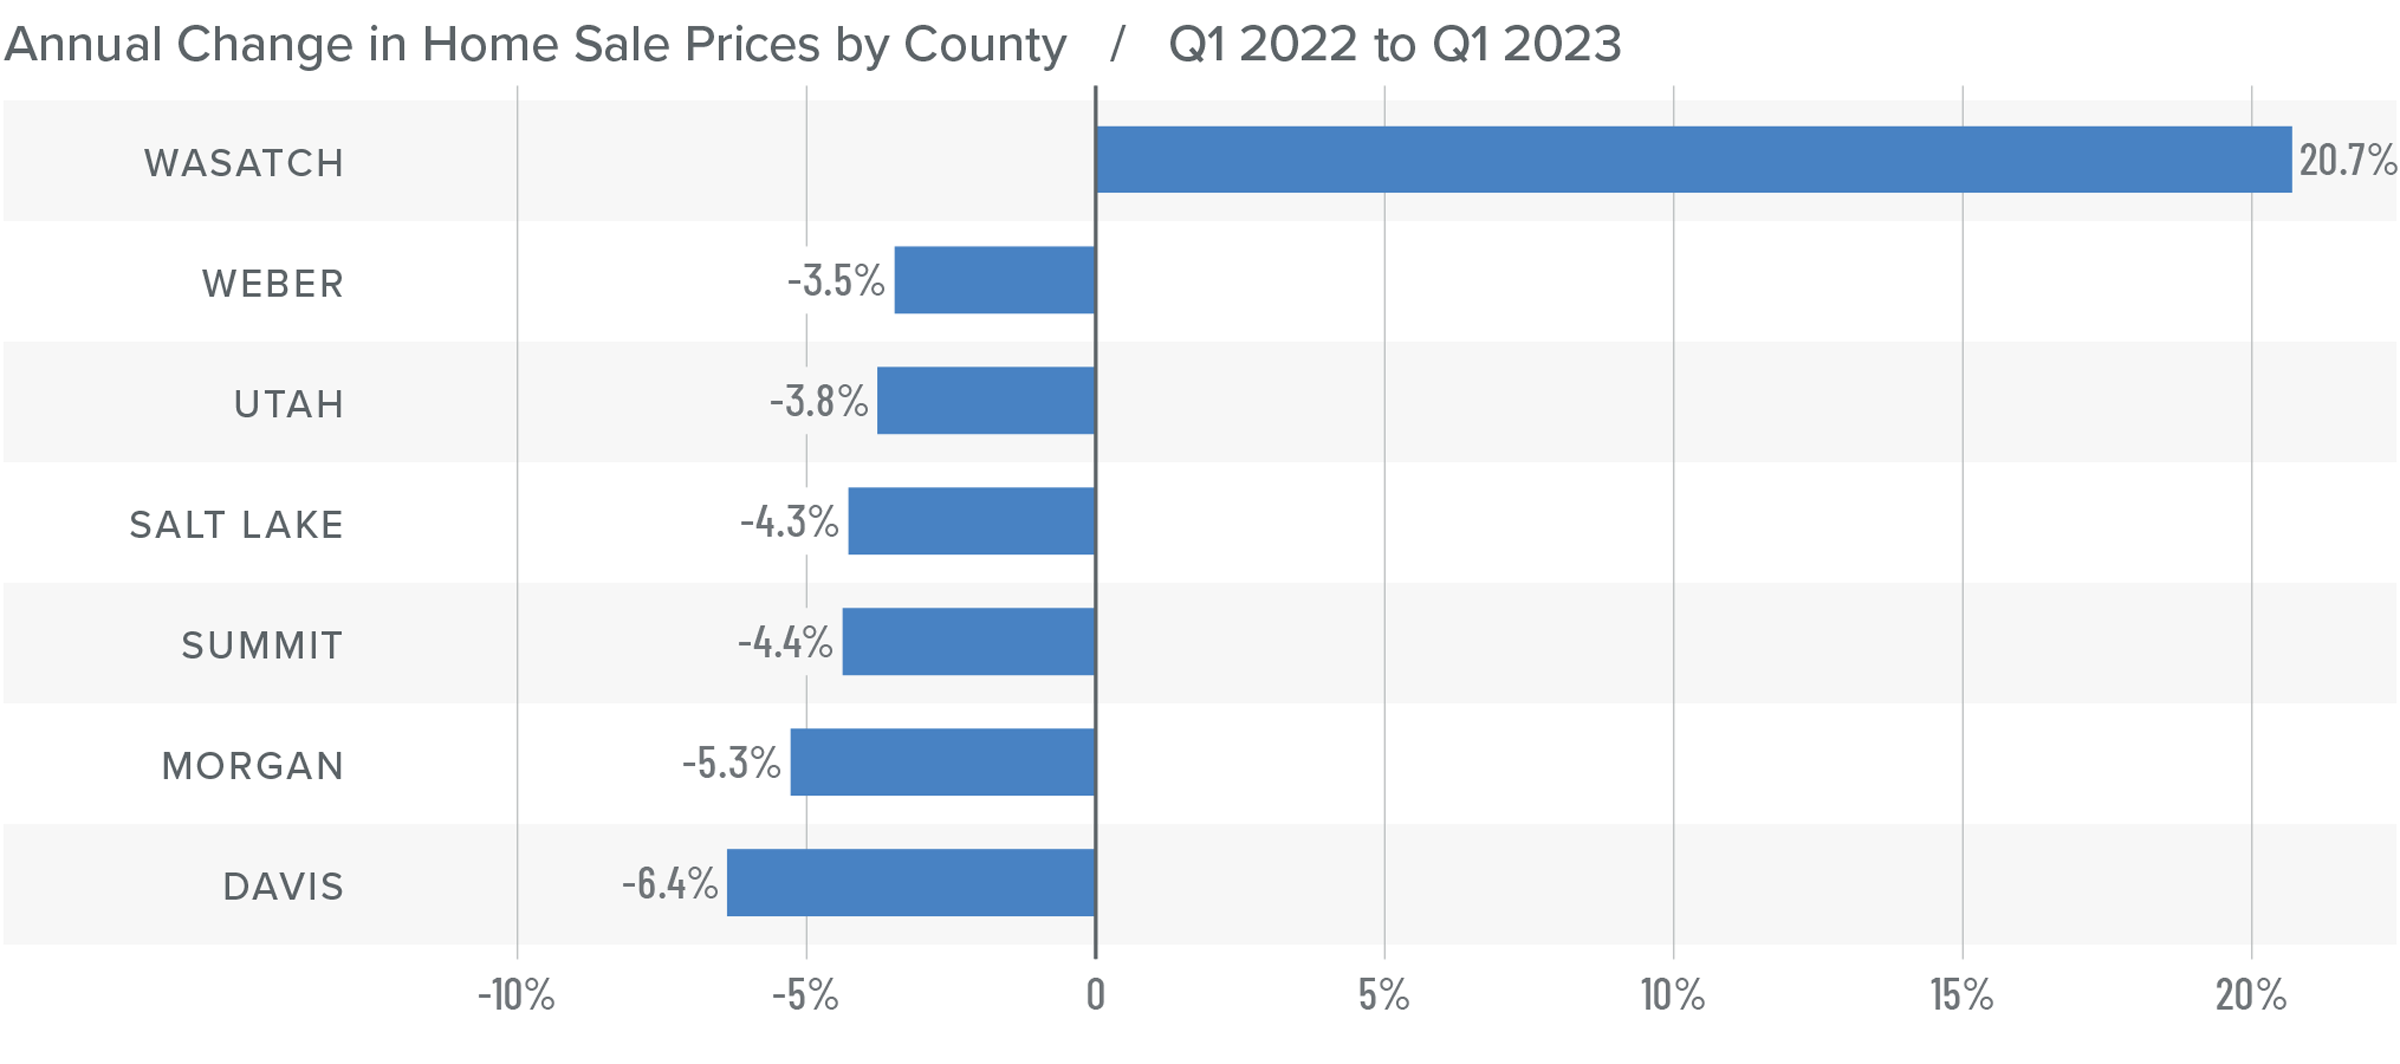 A bar graph showing the annual change in home sale prices for various counties in Utah from Q1 2022 to Q1 2023. Wasatch is at 20.7%, Weber -3.5%, Utah -3.8%, Salt Lake -4.3%, Summit -4.4%, Morgan -5.3%, and Davis -6.4%.